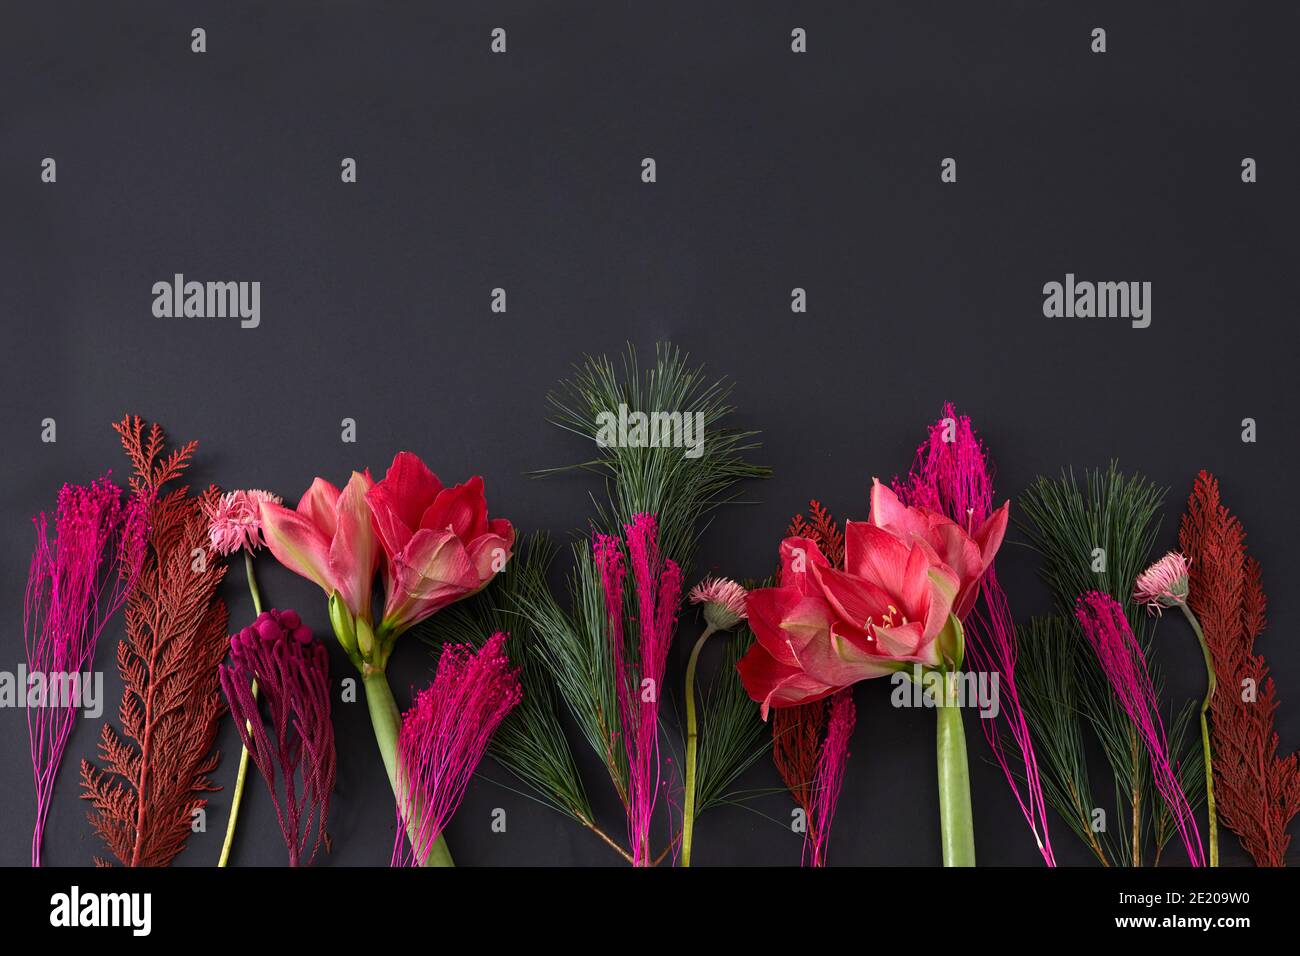 Top view composition of bright red colored flowers and green stems arranged in row on black background Stock Photo